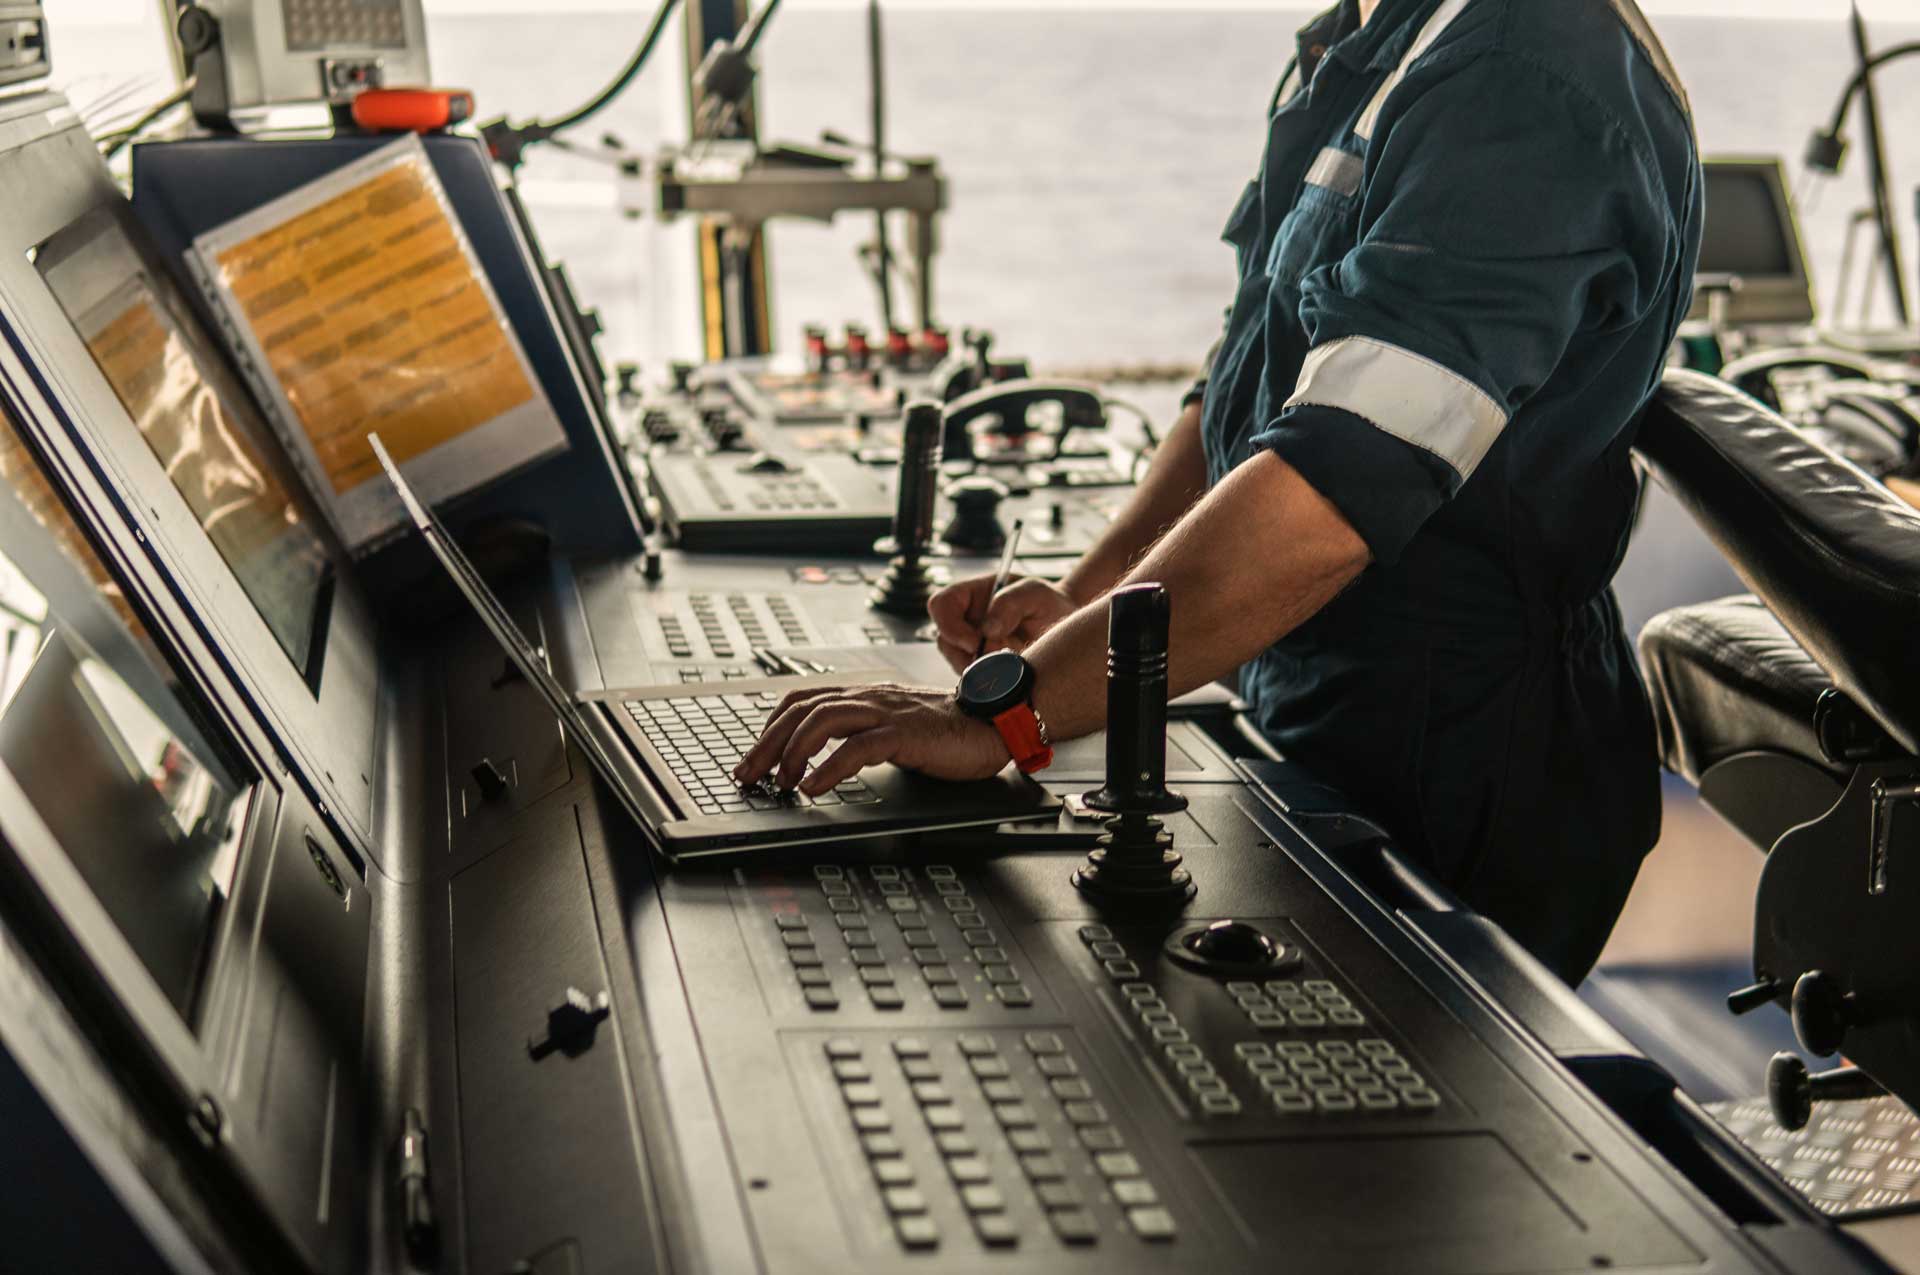 Dynamic positioning and critical systems controls